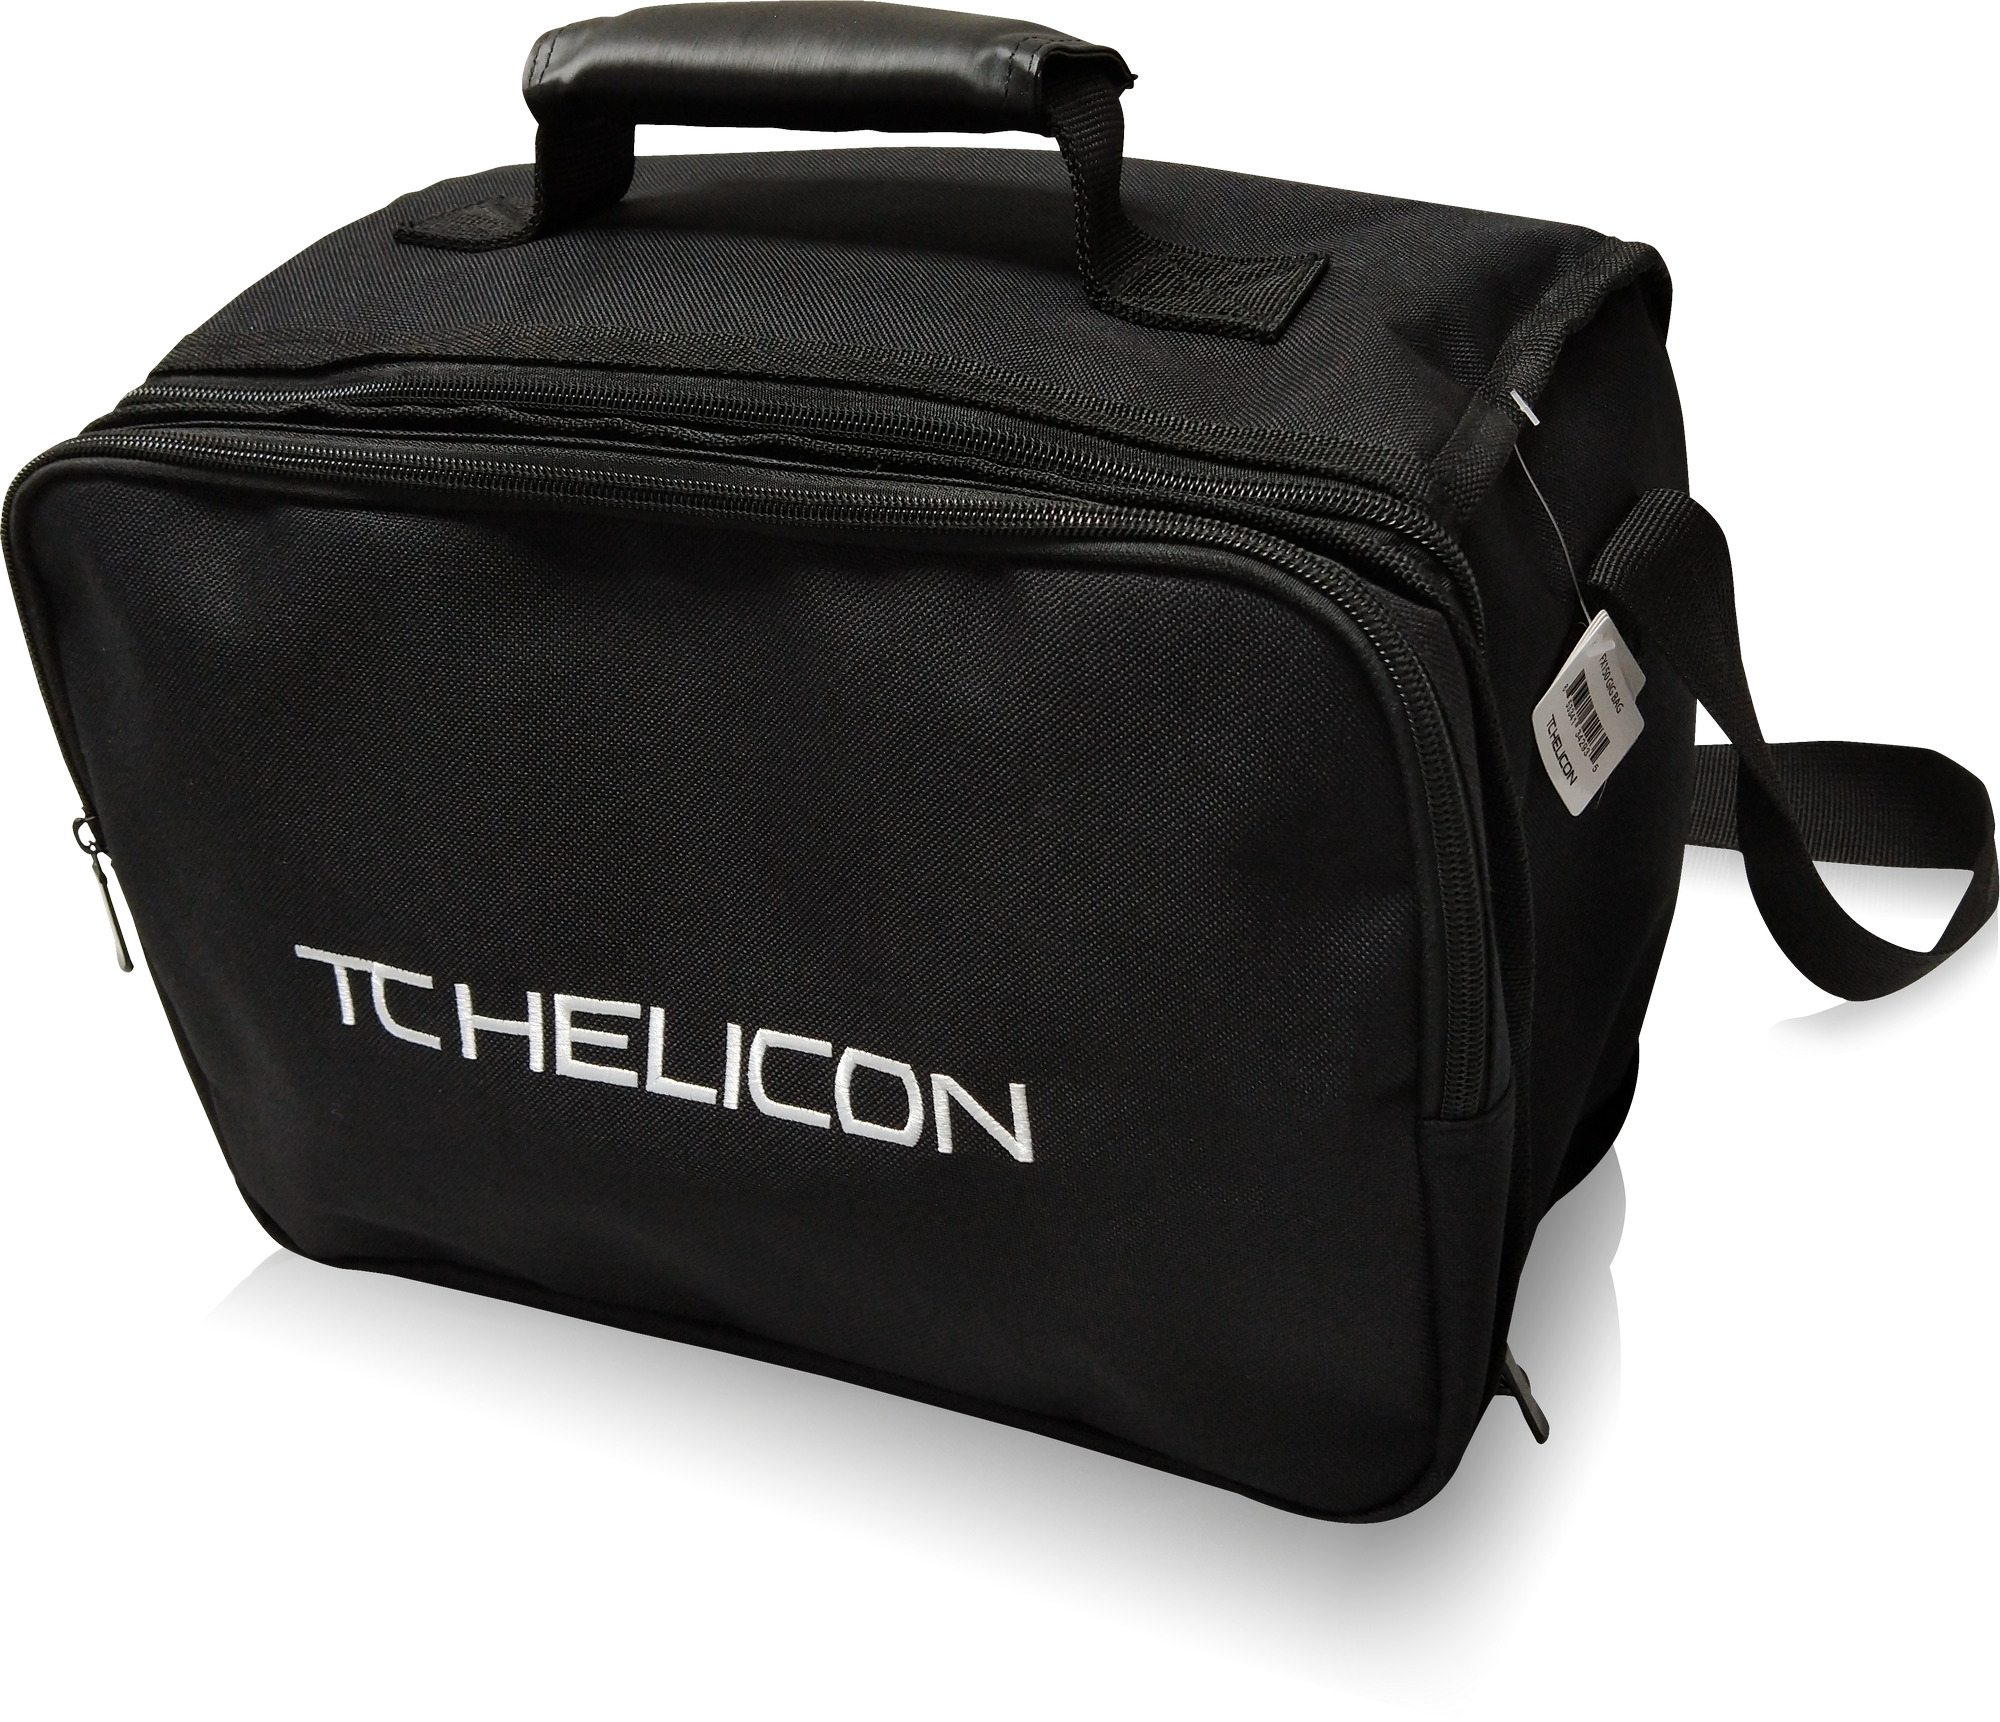 TC Helicon | Product | FX150 GIG BAG